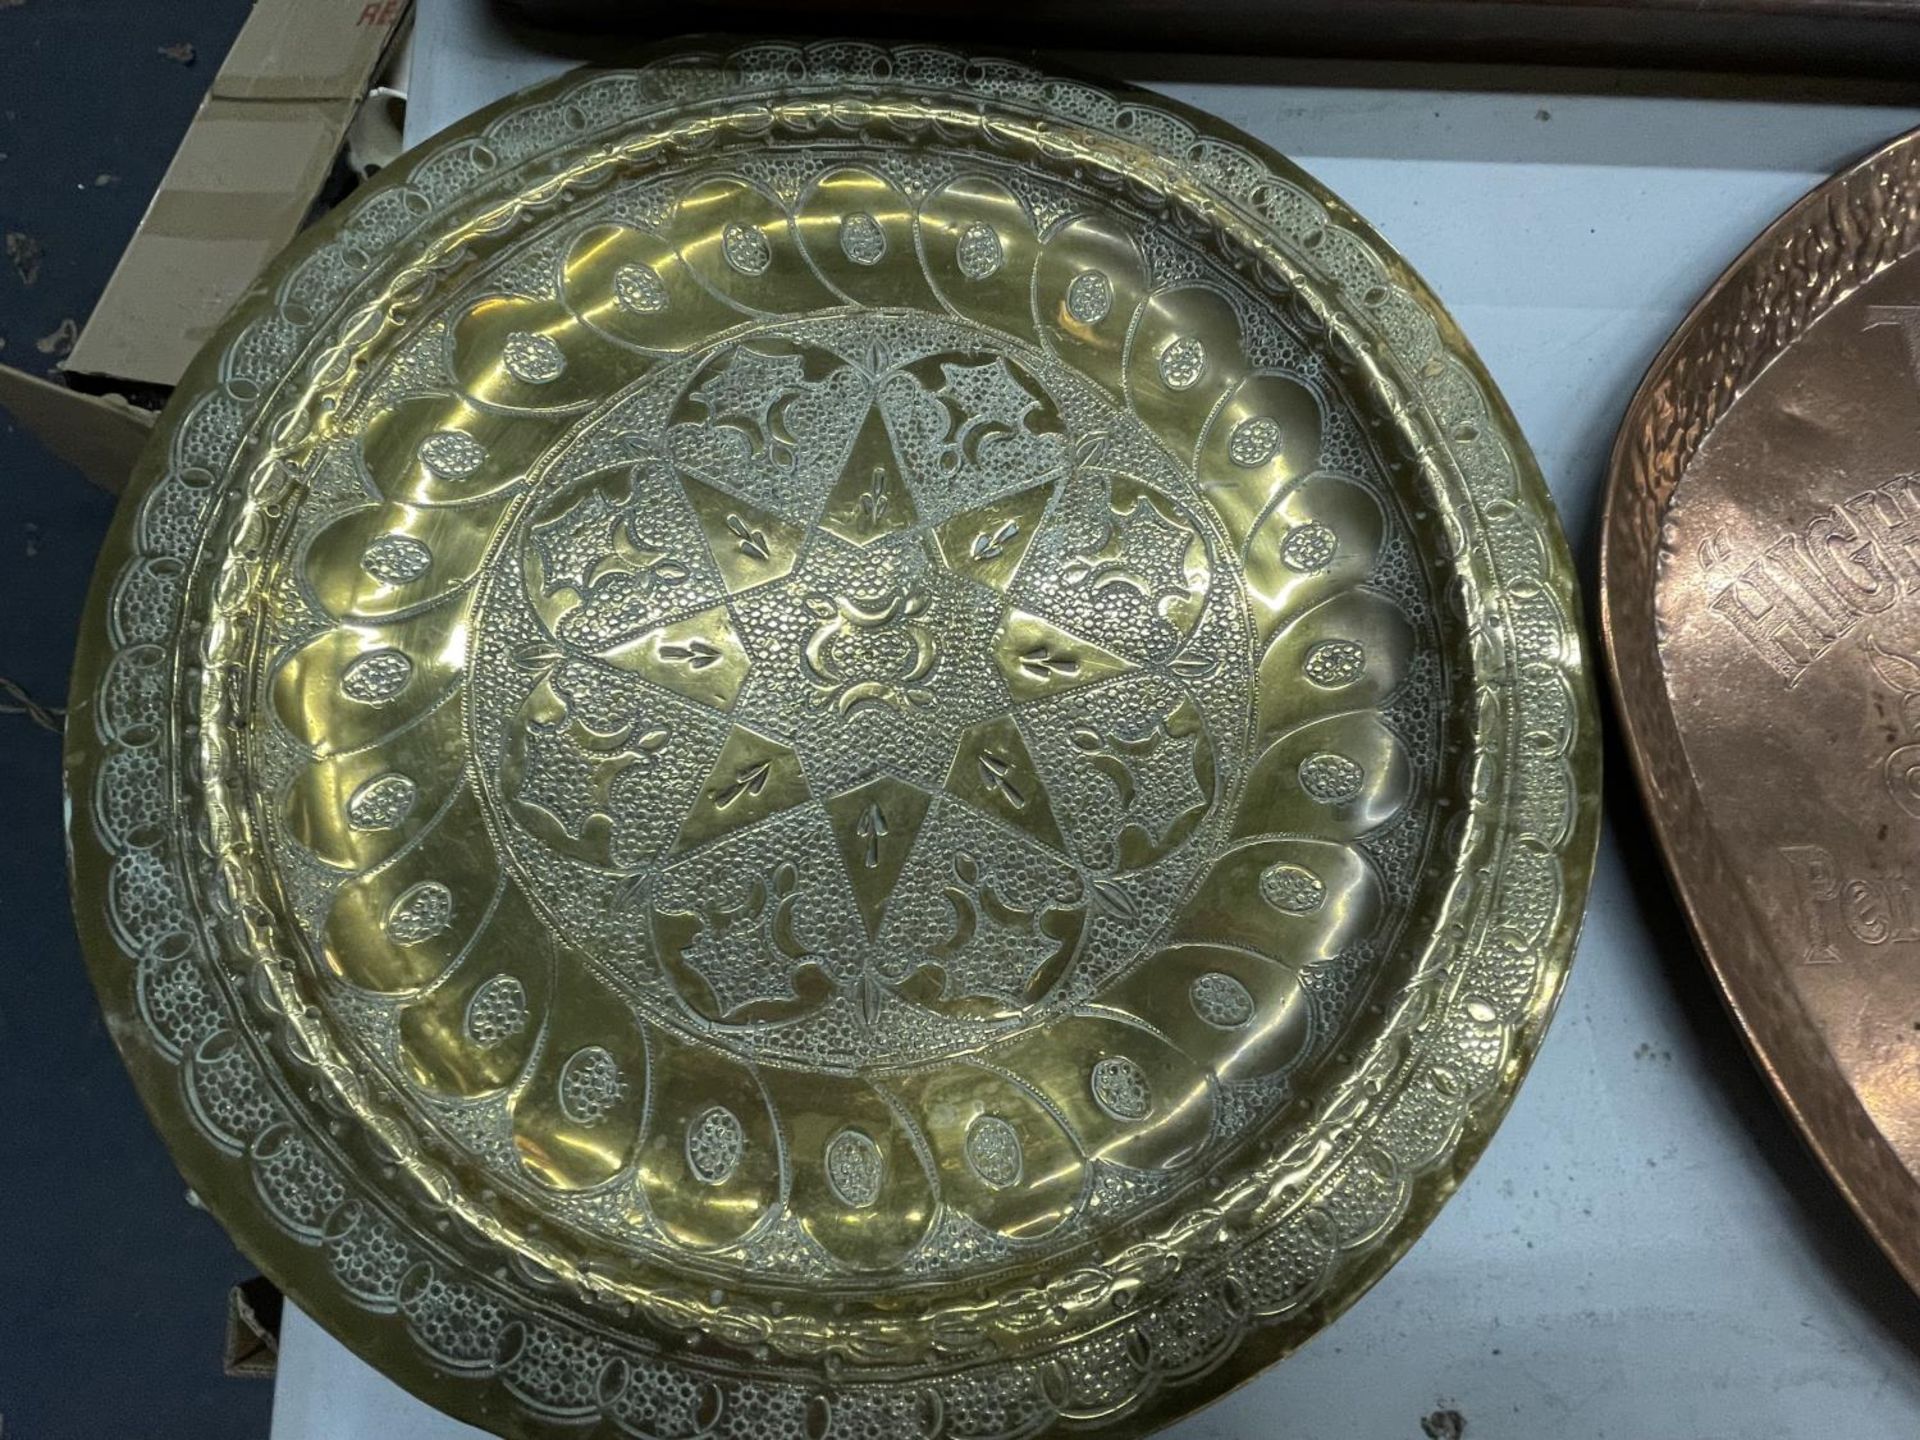 A QUANTITY OF BRASS ITEMS TO INCLUDE A BRASS INLAID WOODEN TRAY, TRIVETS, A WALL PLATE PLUS A COPPER - Image 4 of 5